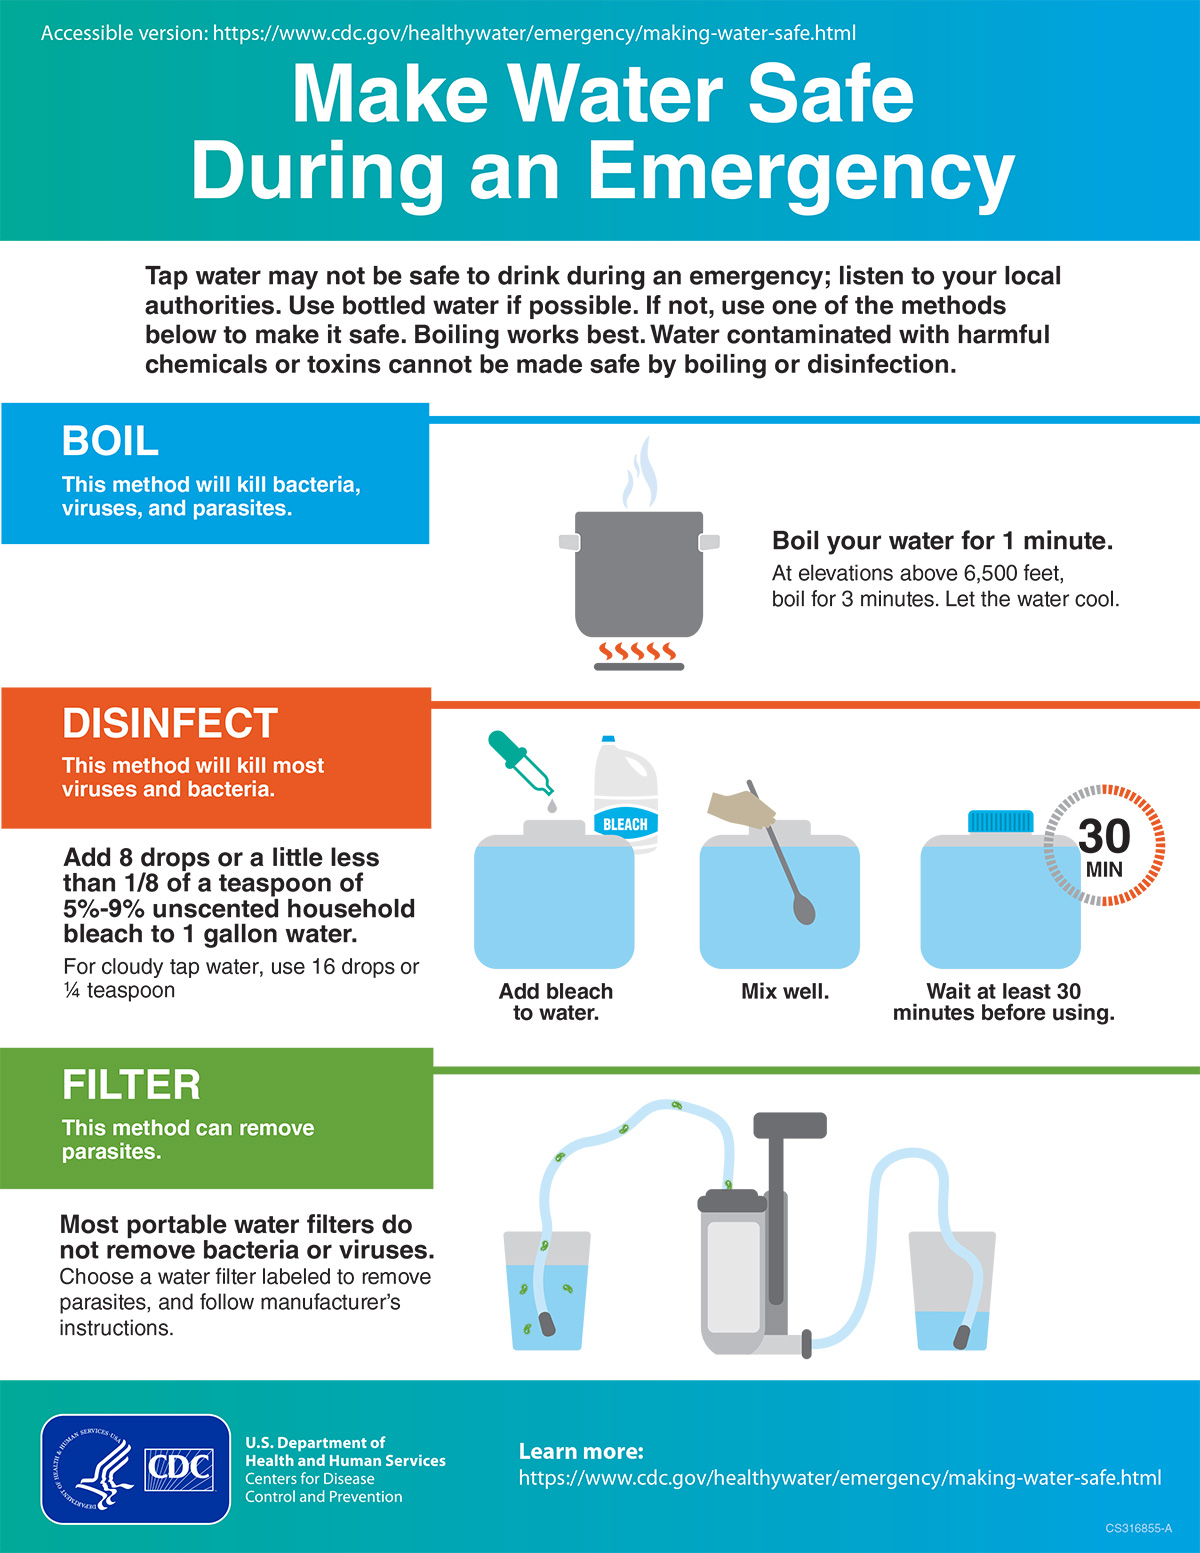 Make Water Safe During an Emergency (Print-only)